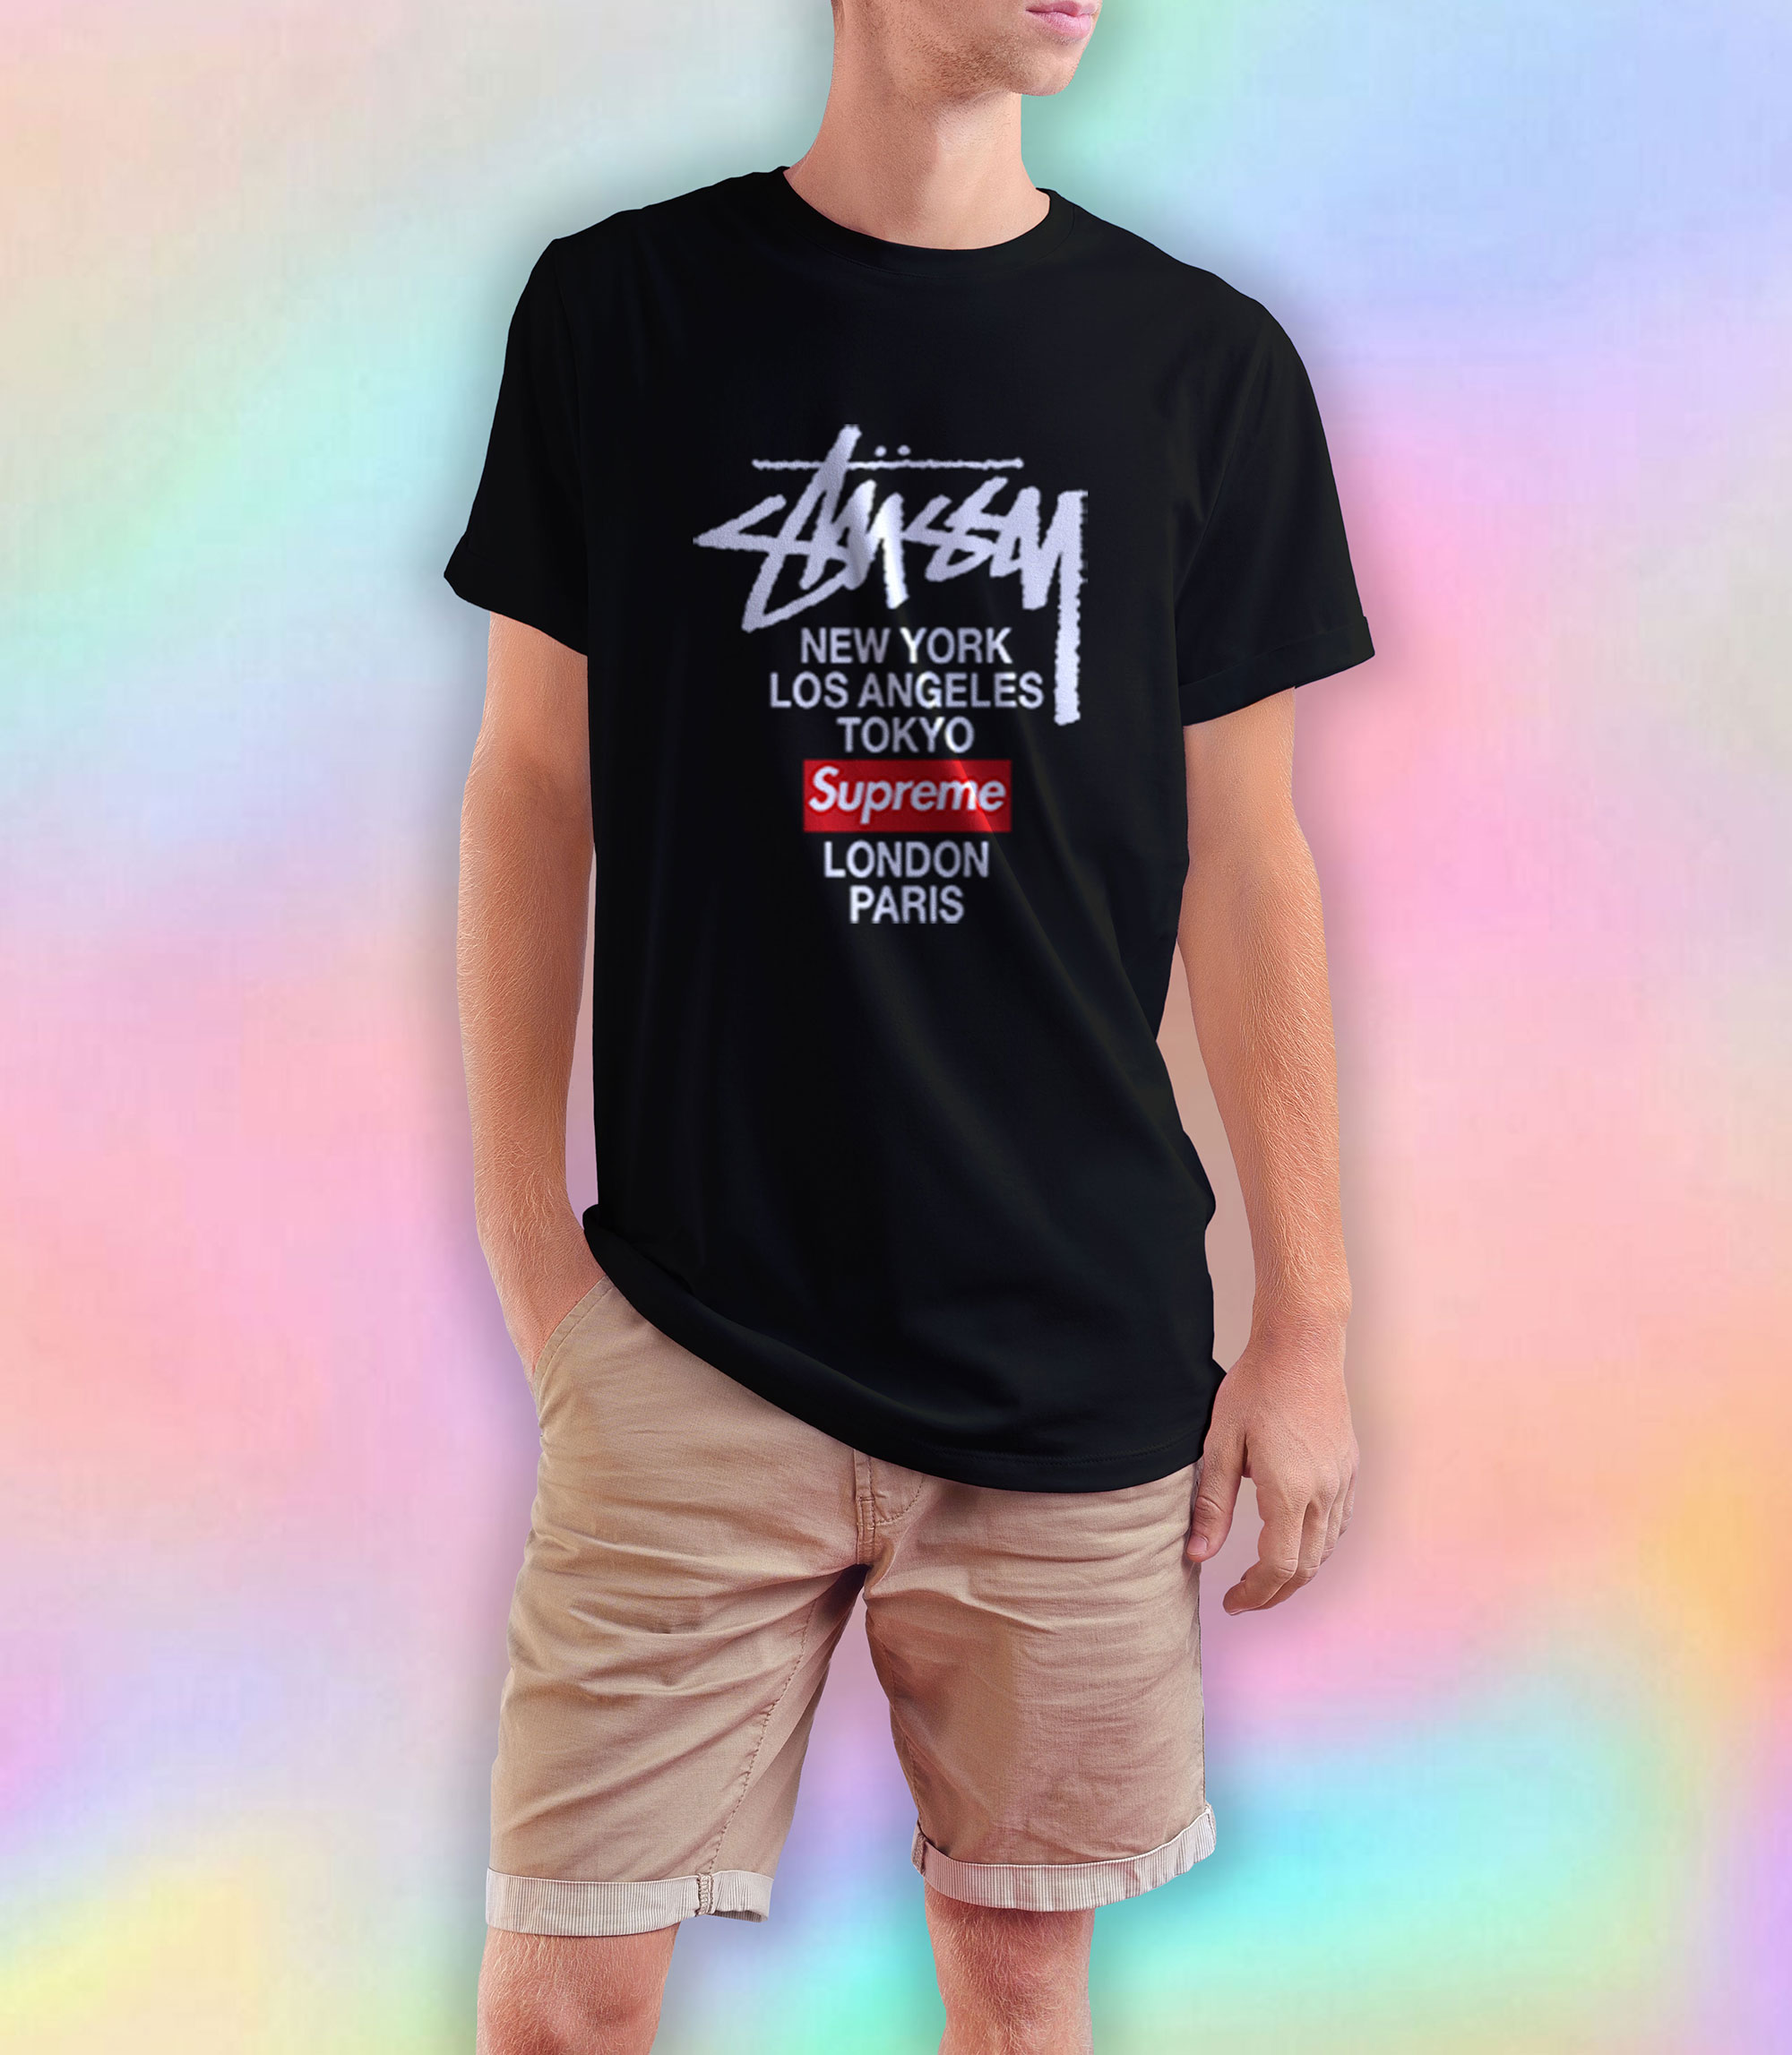 Best Selling X Stussy Collab - Cloudteesdesign.com